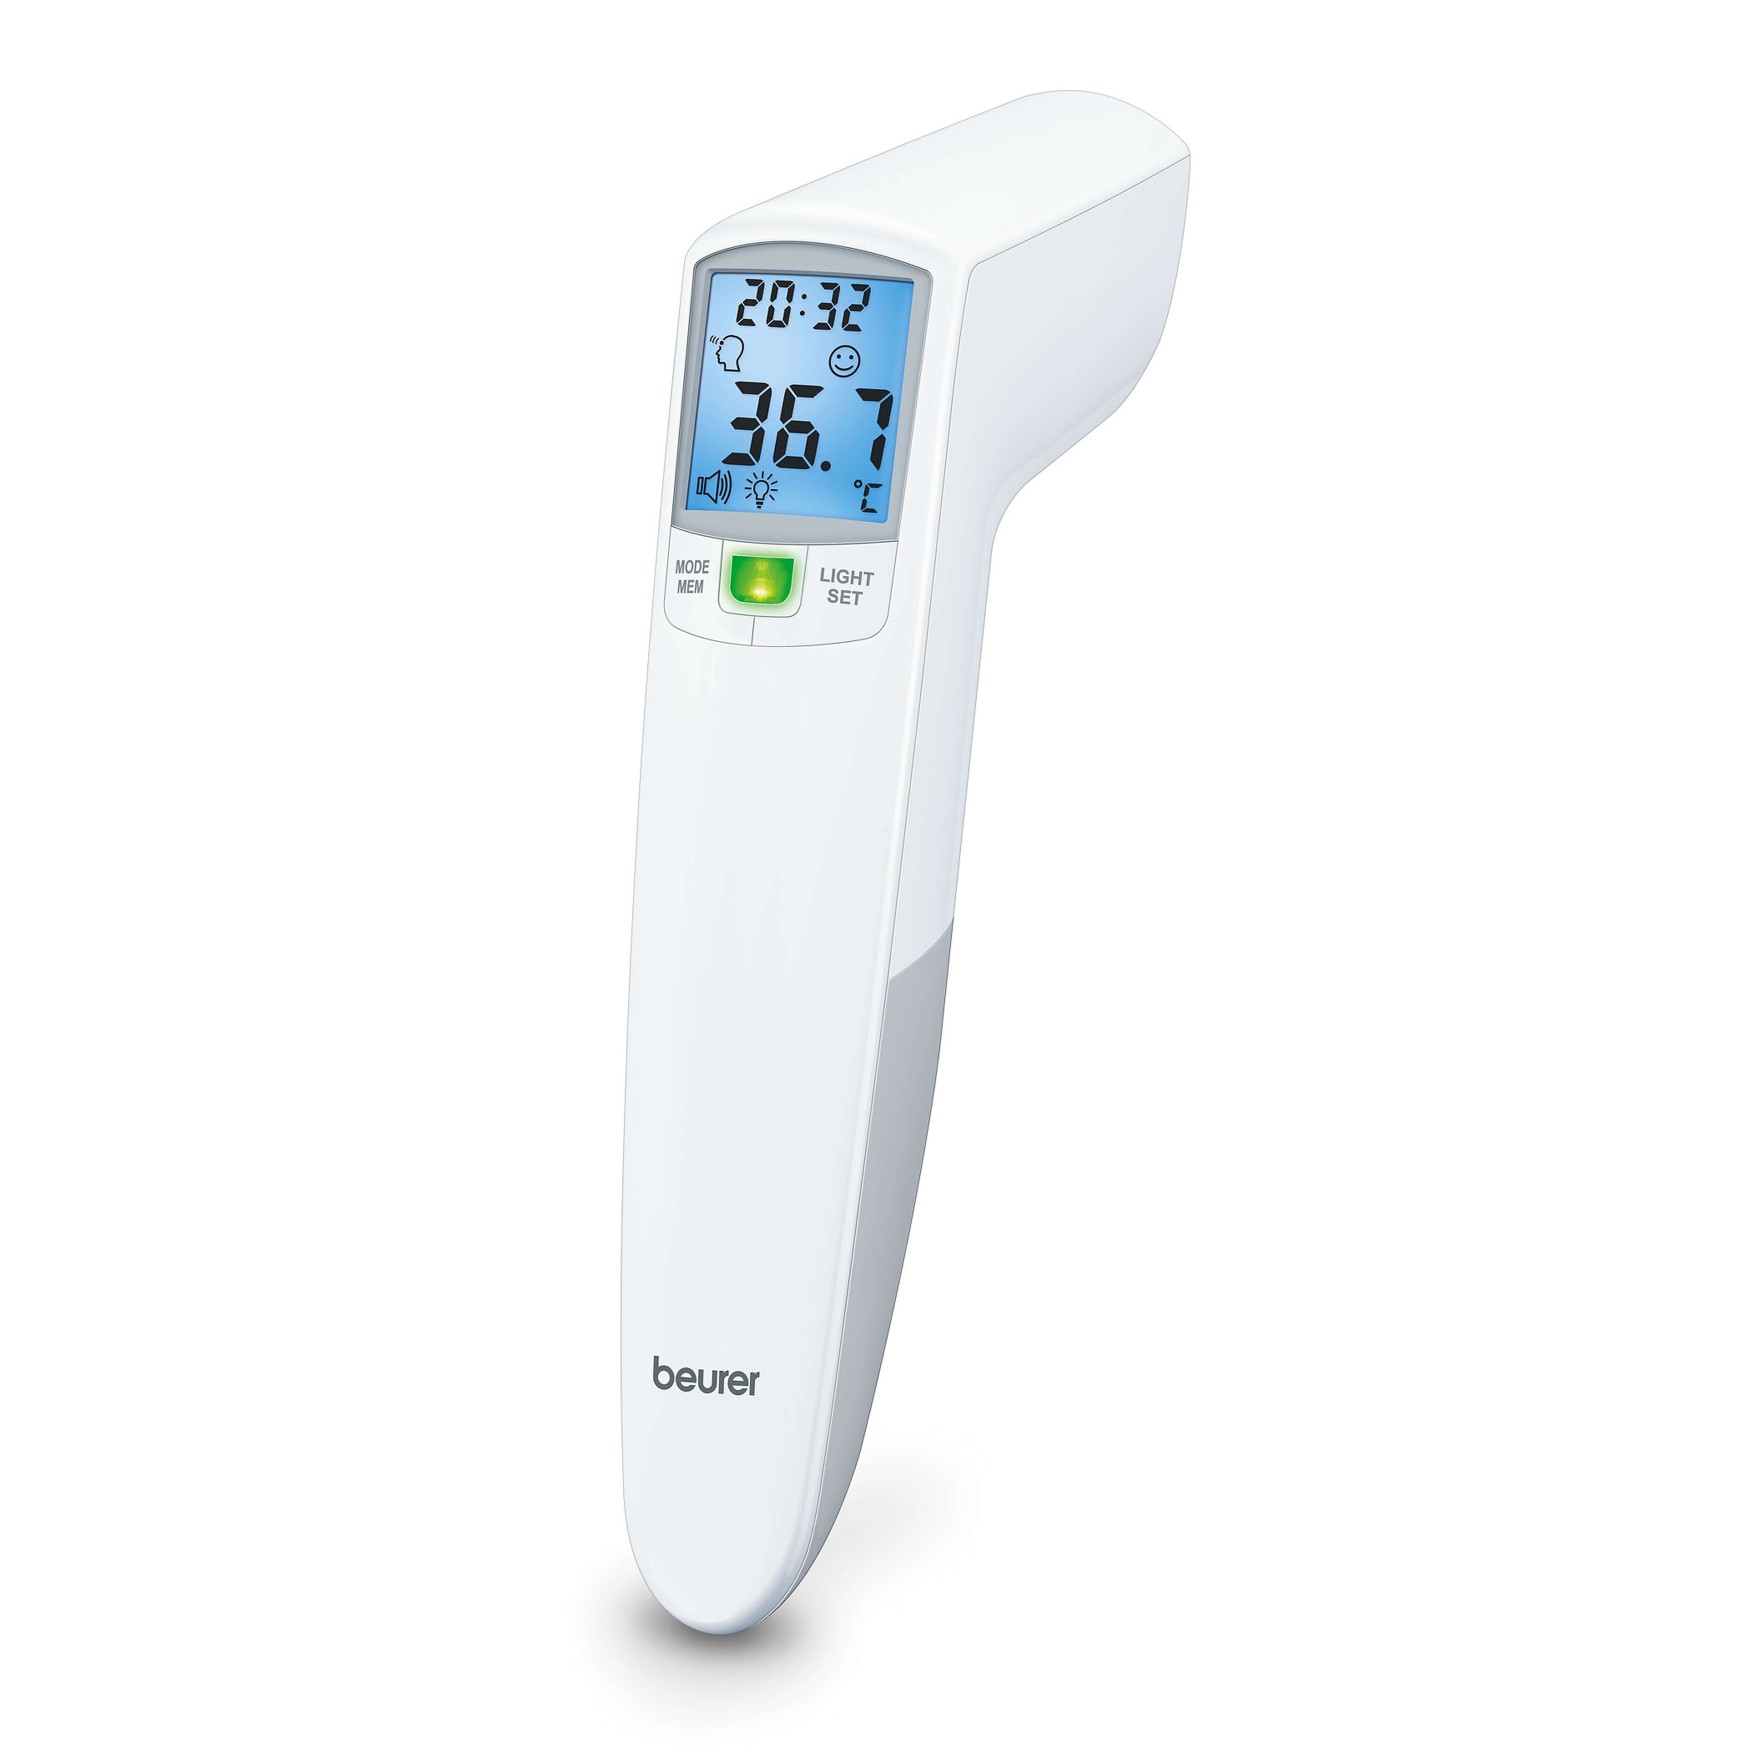 The Beurer FT100 thermometer lights up green when no temperature is detected